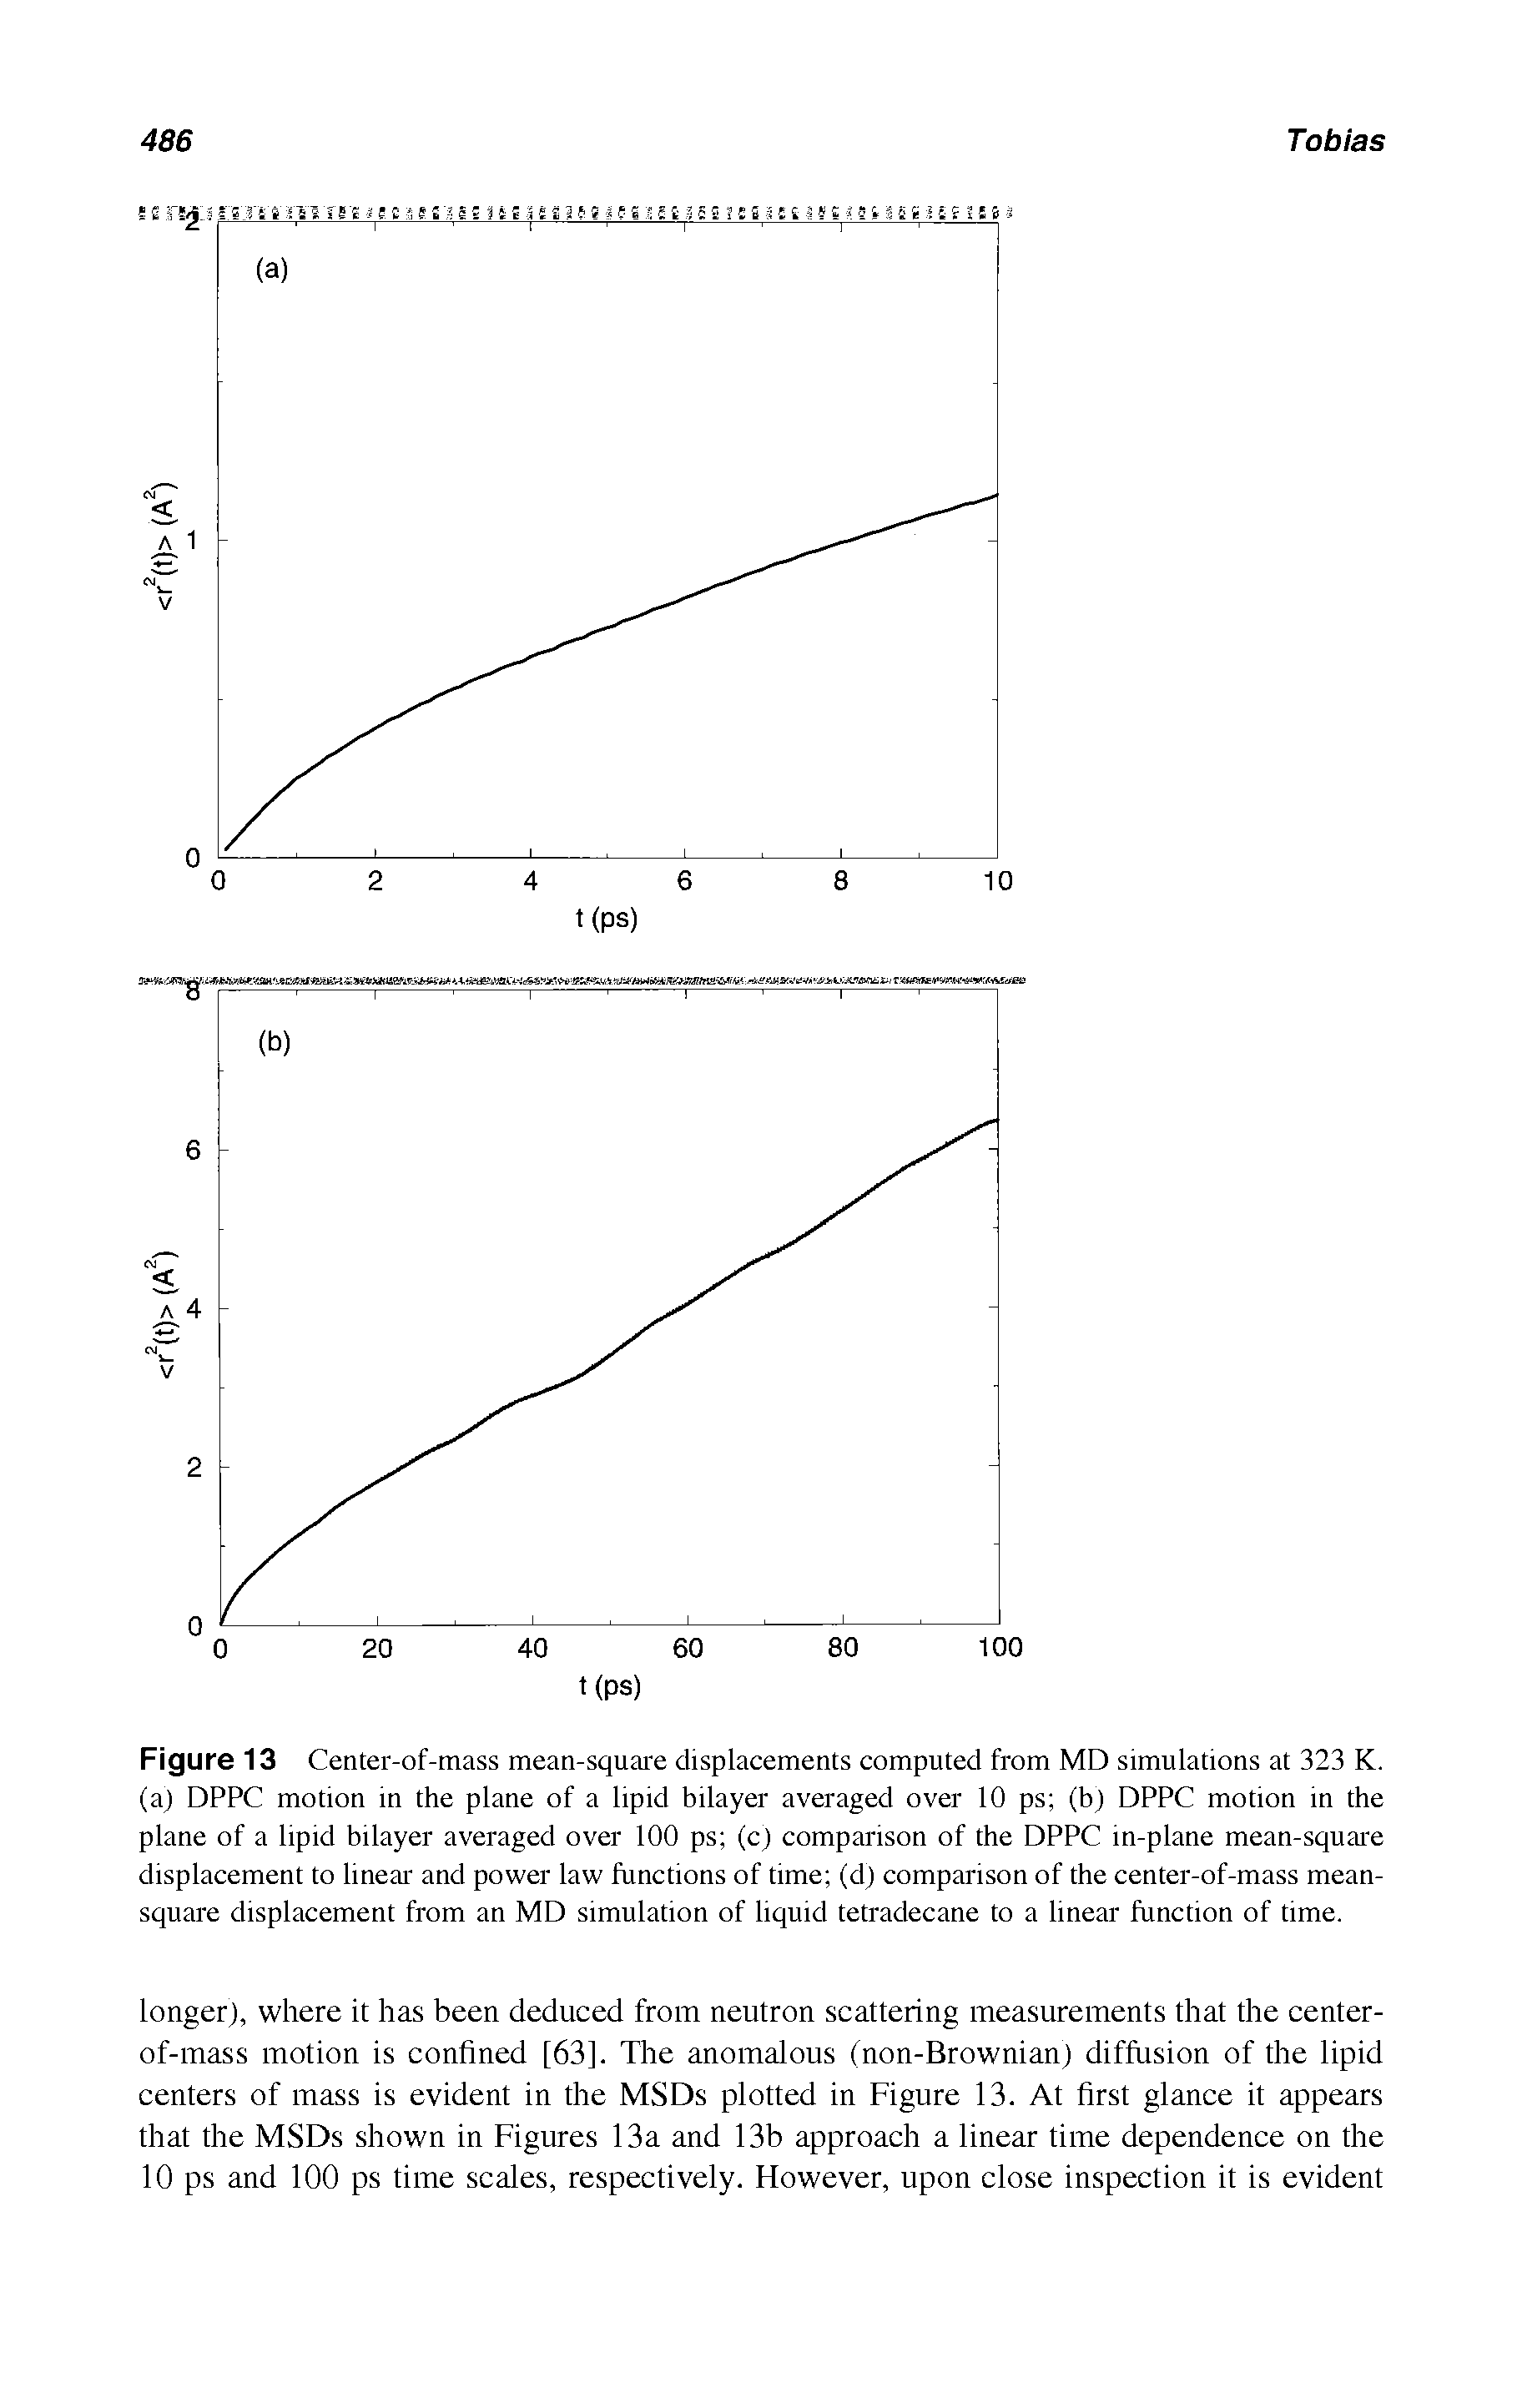 Figure 13 Center-of-mass mean-square displacements computed from MD simulations at 323 K. (a) DPPC motion in the plane of a lipid bilayer averaged over 10 ps (b) DPPC motion in the plane of a lipid bilayer averaged over 100 ps (c) comparison of the DPPC m-plane mean-square displacement to linear and power law functions of time (d) comparison of the center-of-mass mean-square displacement from an MD simulation of liquid tetradecane to a linear function of time.